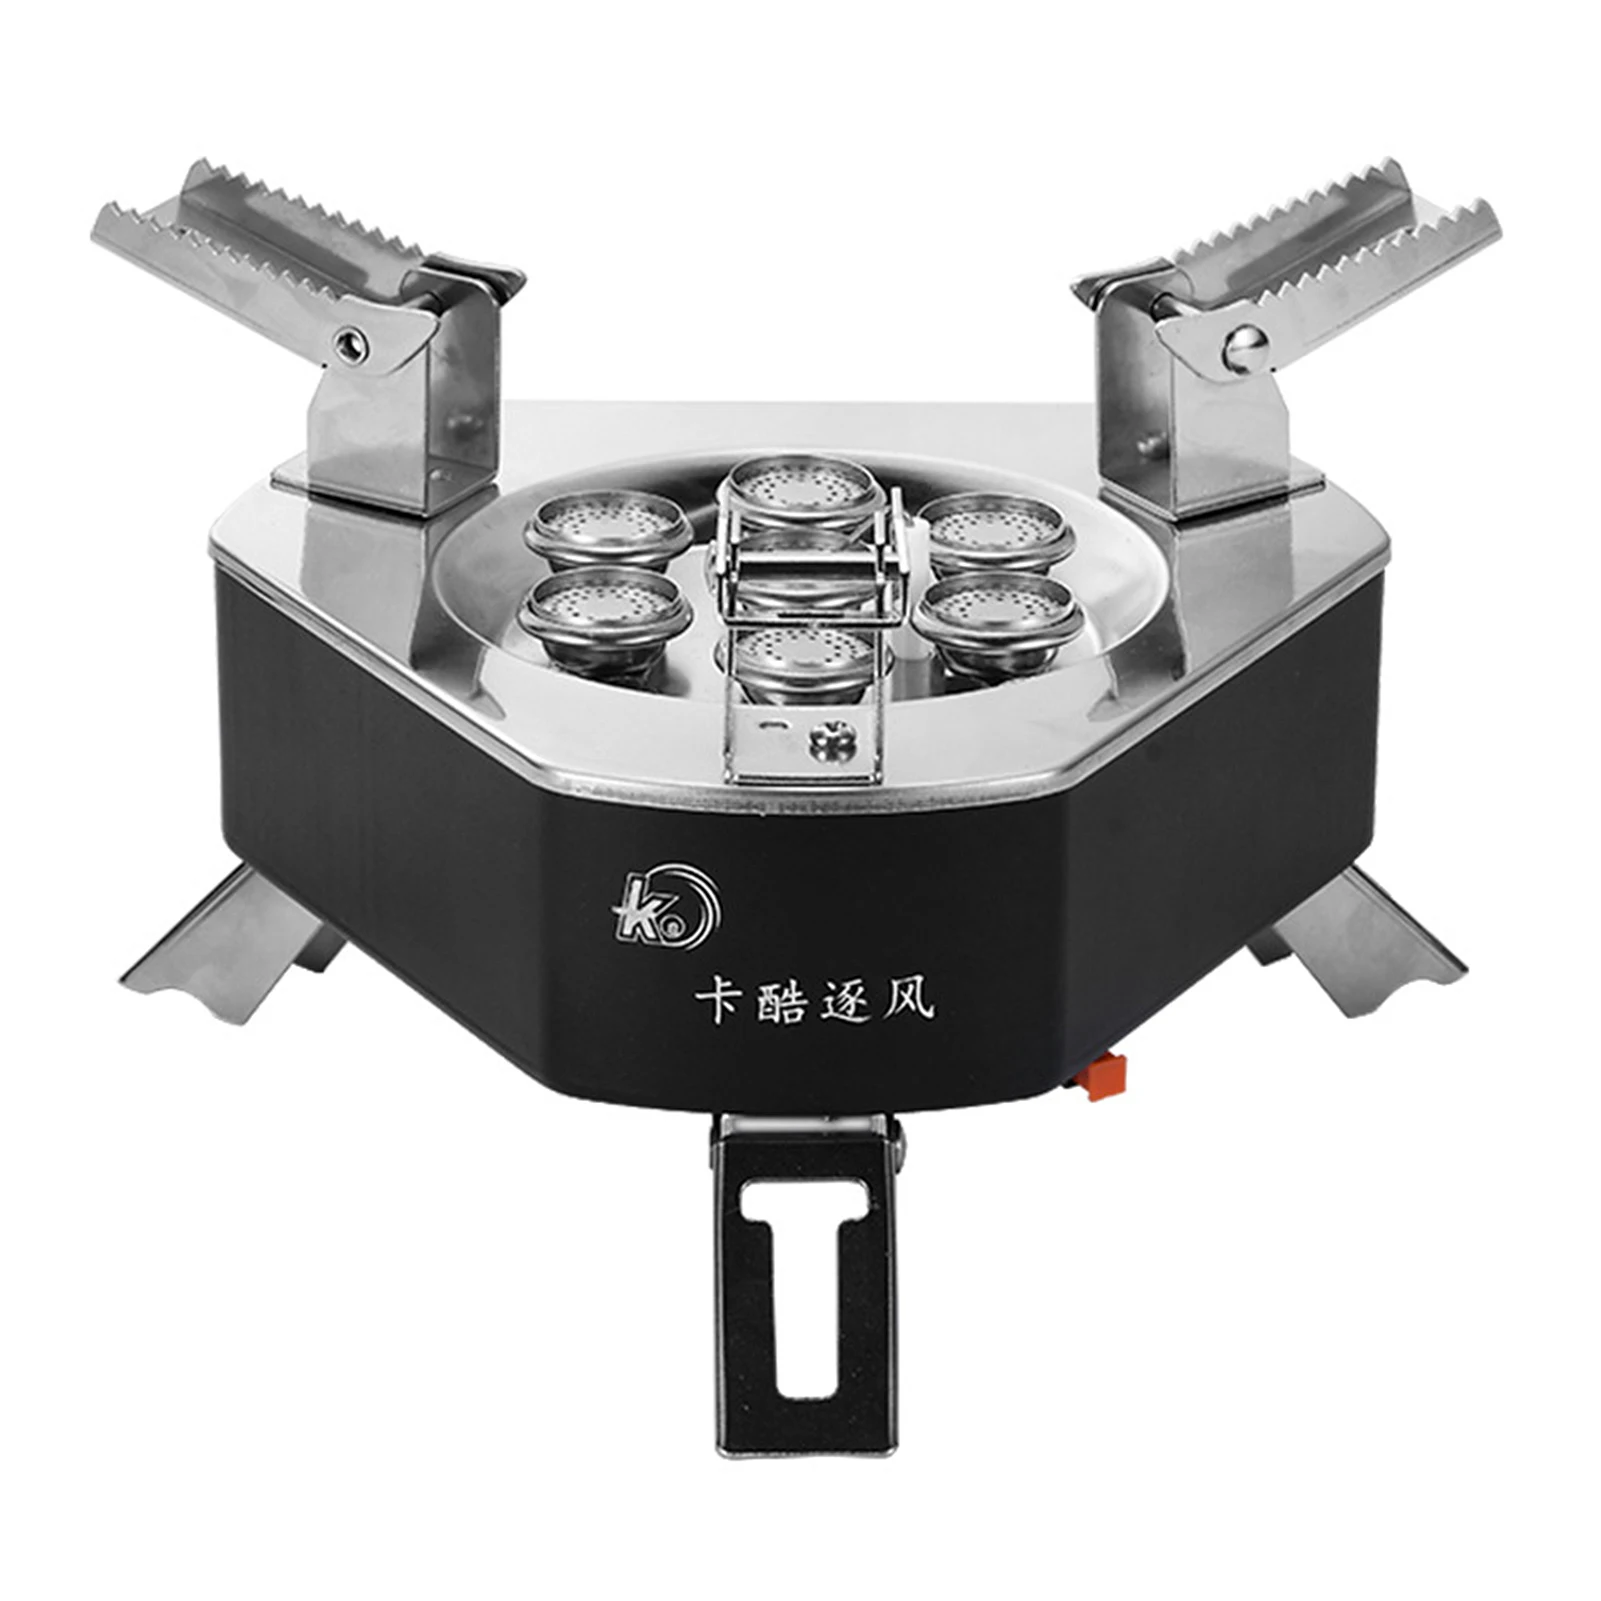 

Portable Camping Stove Outdoor 18900W Windproof Gas Stove for Outdoor Hiking Picnic Backpacking Compact Stoves Furnace Burner